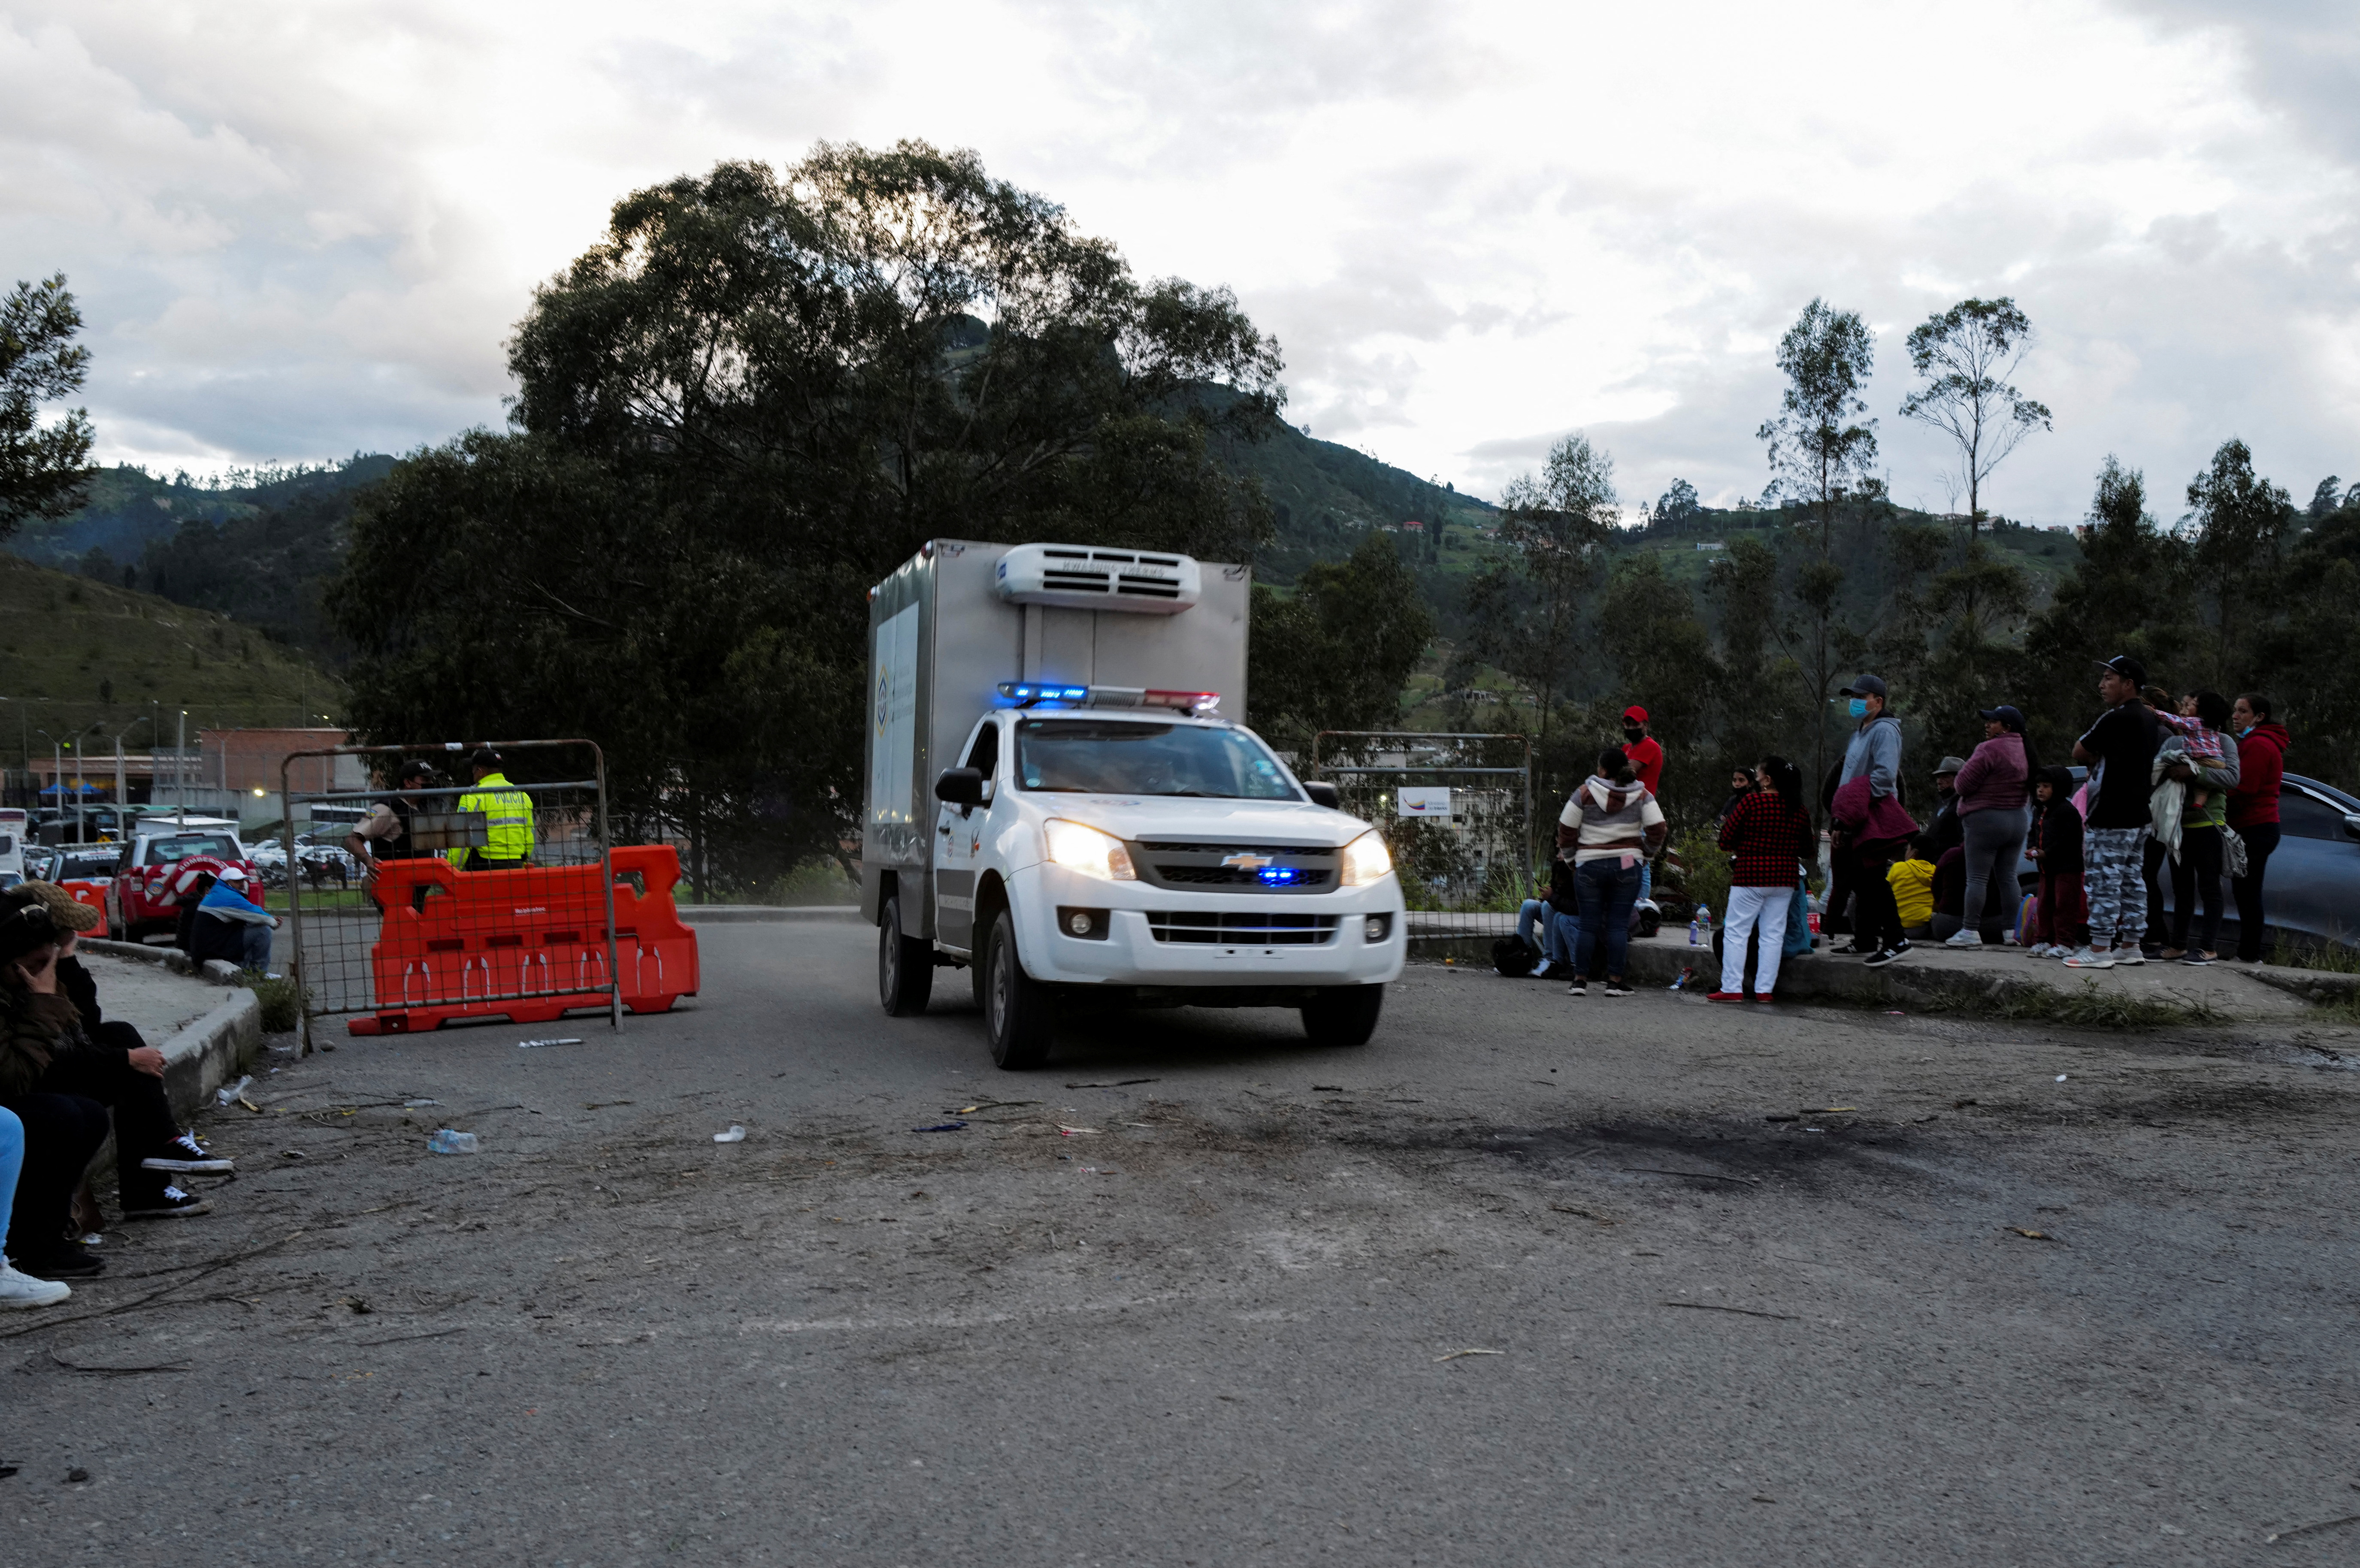 A medical vehicle carrying dead bodies drives past a police checkpoint where relatives of inmates wait for news of their loved ones after a riot broke out at the El Turi prison where several inmates were killed or injured, in Cuenca